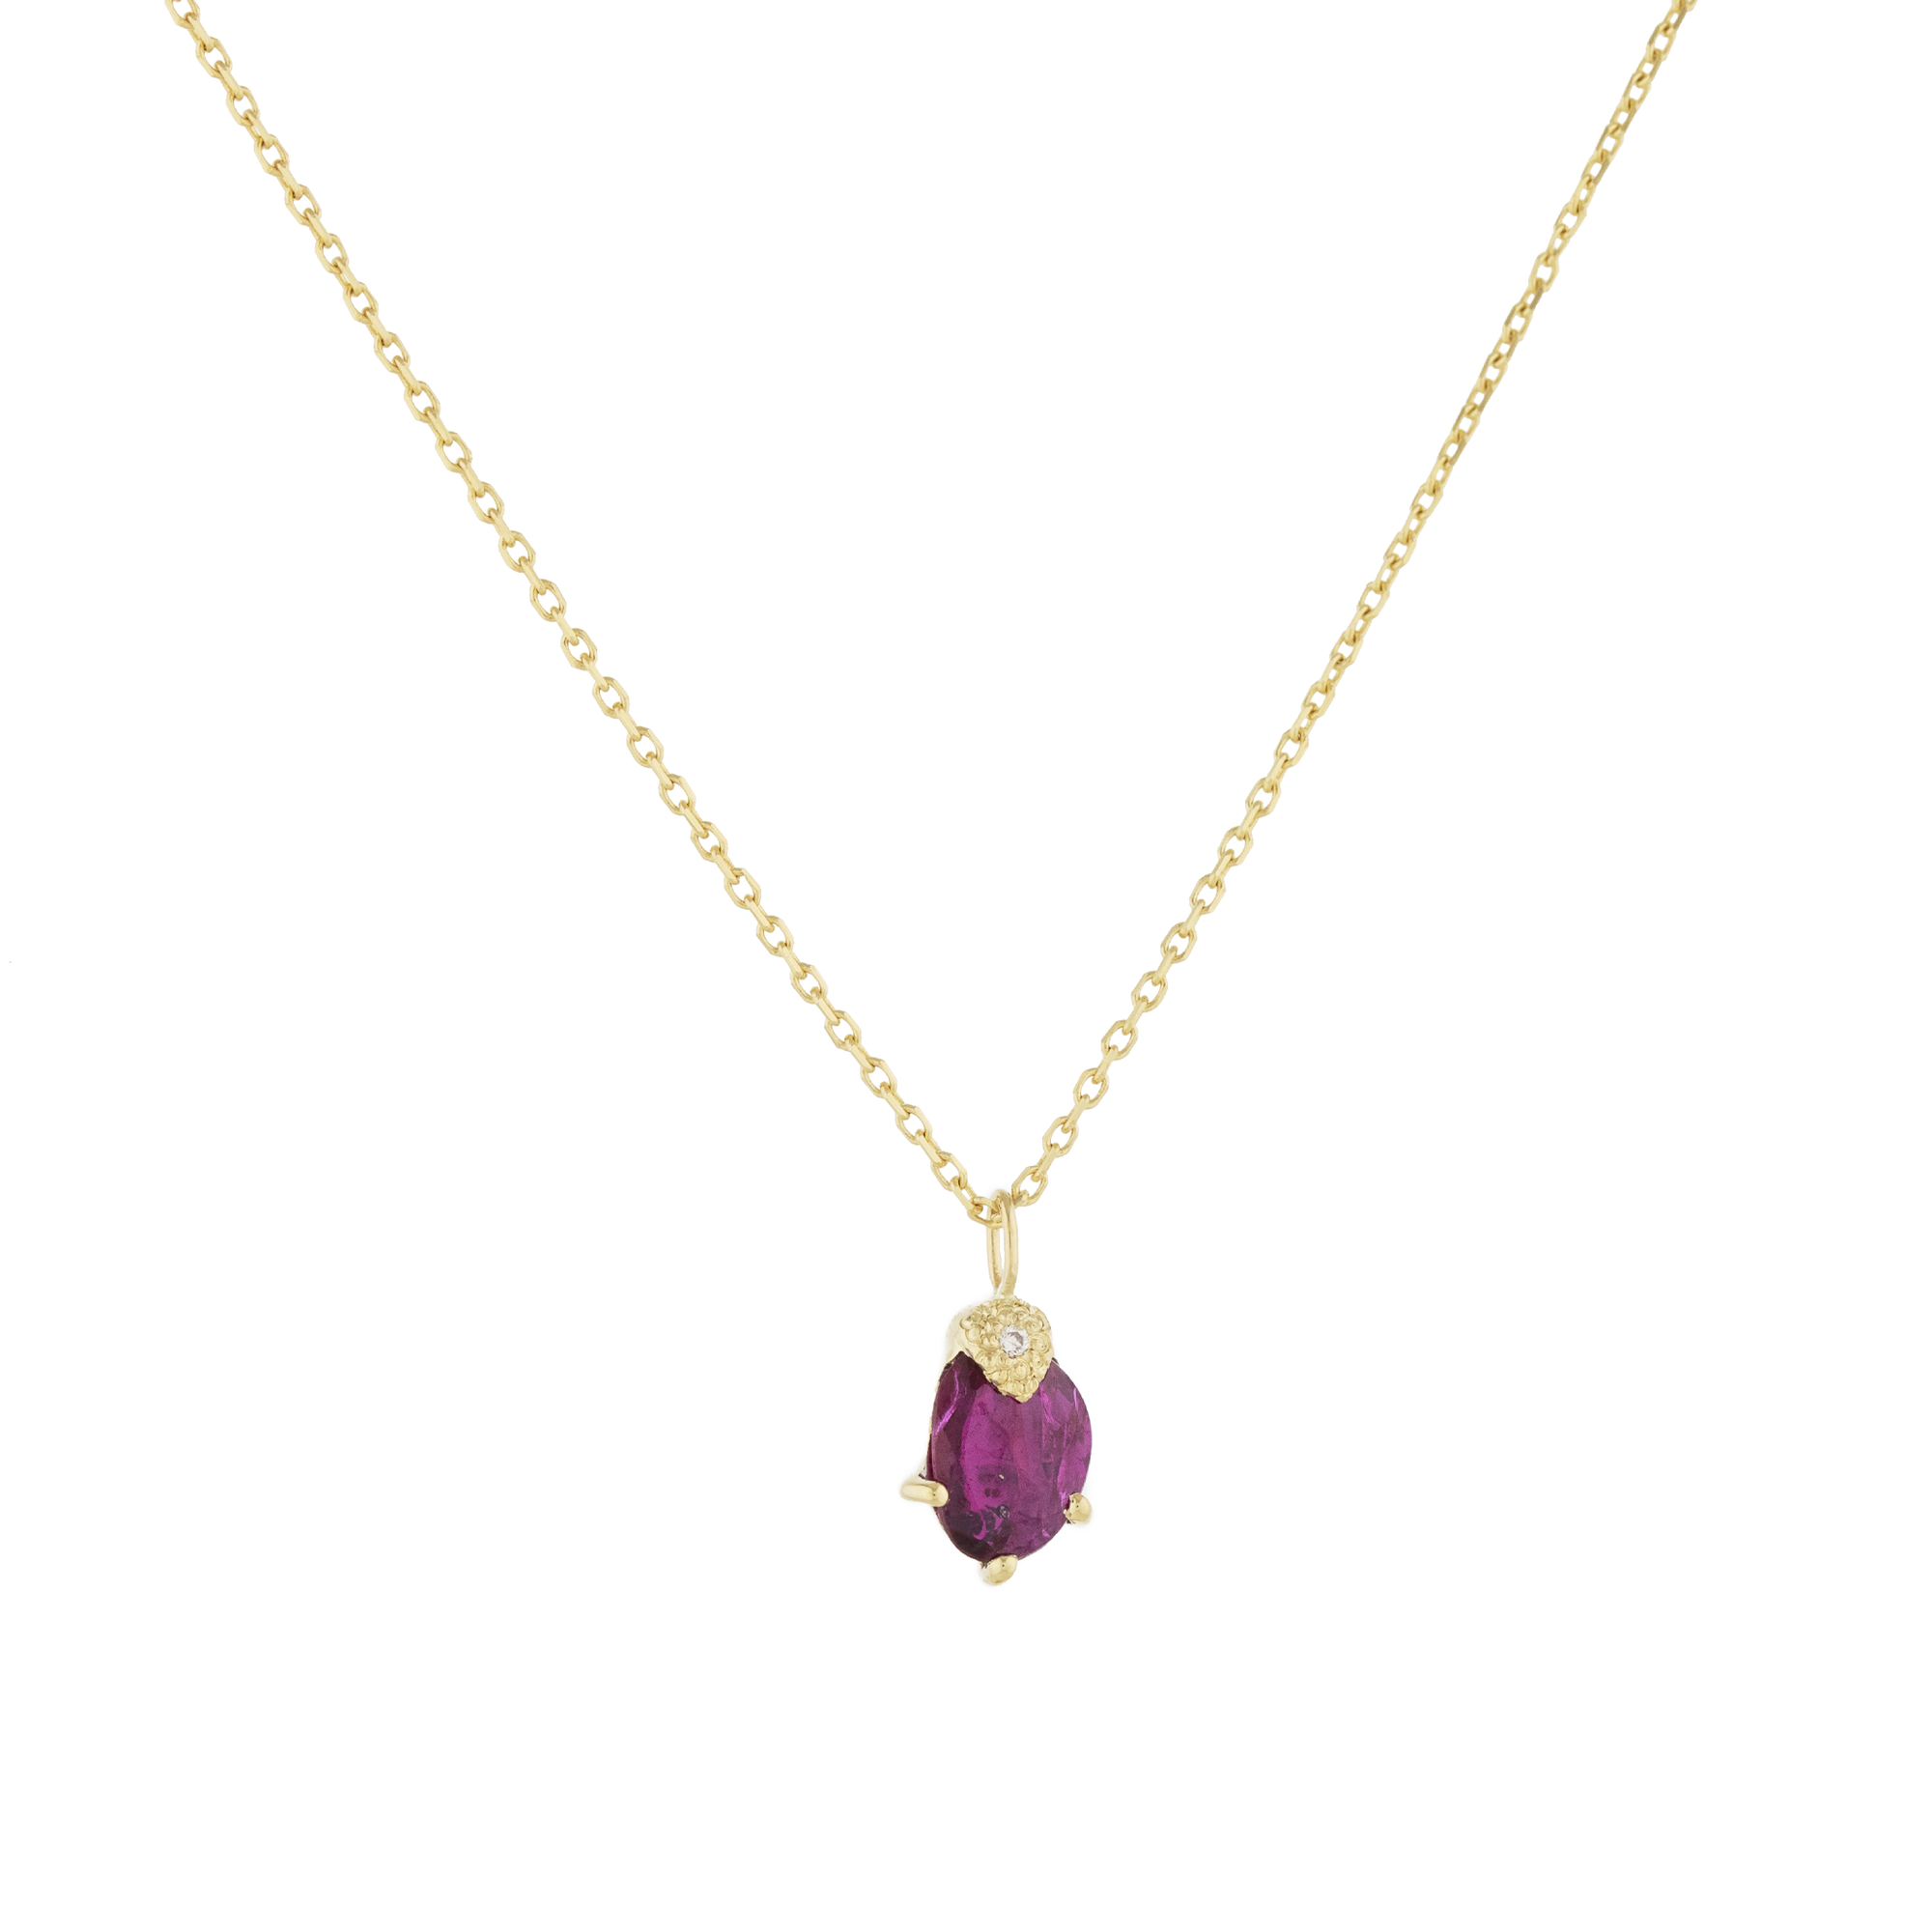 Celine Daoust Small Ruby Pendant Necklace